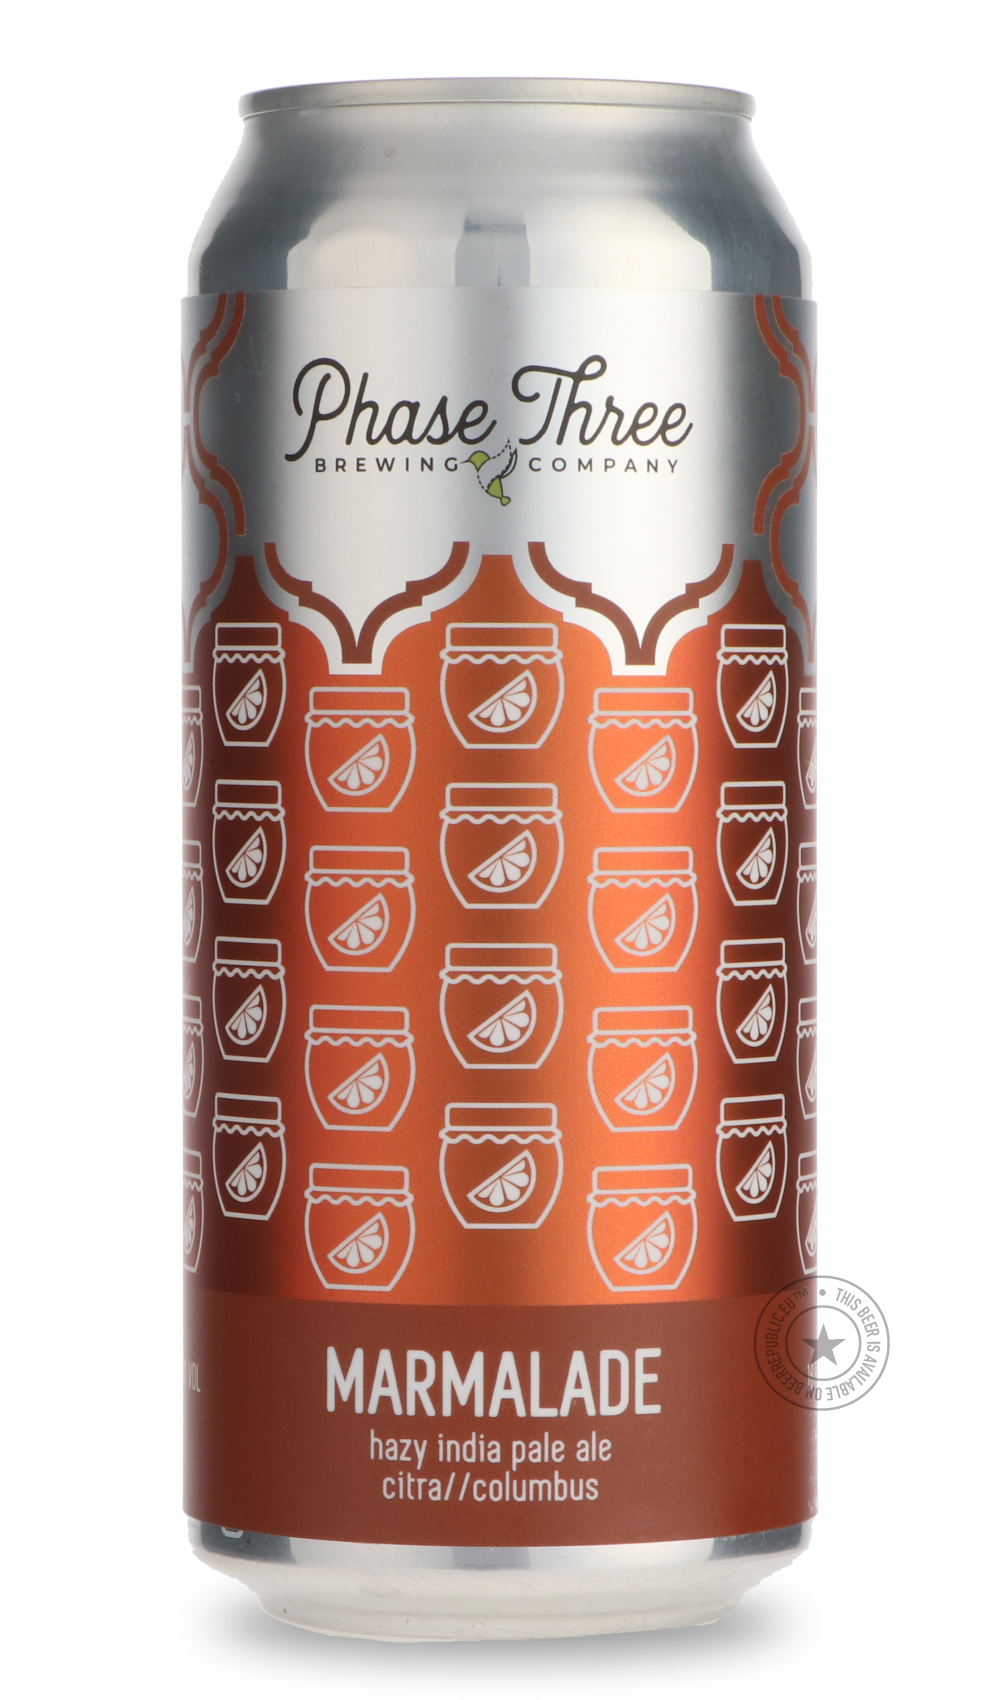 -Phase Three- Marmalade-IPA- Only @ Beer Republic - The best online beer store for American & Canadian craft beer - Buy beer online from the USA and Canada - Bier online kopen - Amerikaans bier kopen - Craft beer store - Craft beer kopen - Amerikanisch bier kaufen - Bier online kaufen - Acheter biere online - IPA - Stout - Porter - New England IPA - Hazy IPA - Imperial Stout - Barrel Aged - Barrel Aged Imperial Stout - Brown - Dark beer - Blond - Blonde - Pilsner - Lager - Wheat - Weizen - Amber - Barley Wi